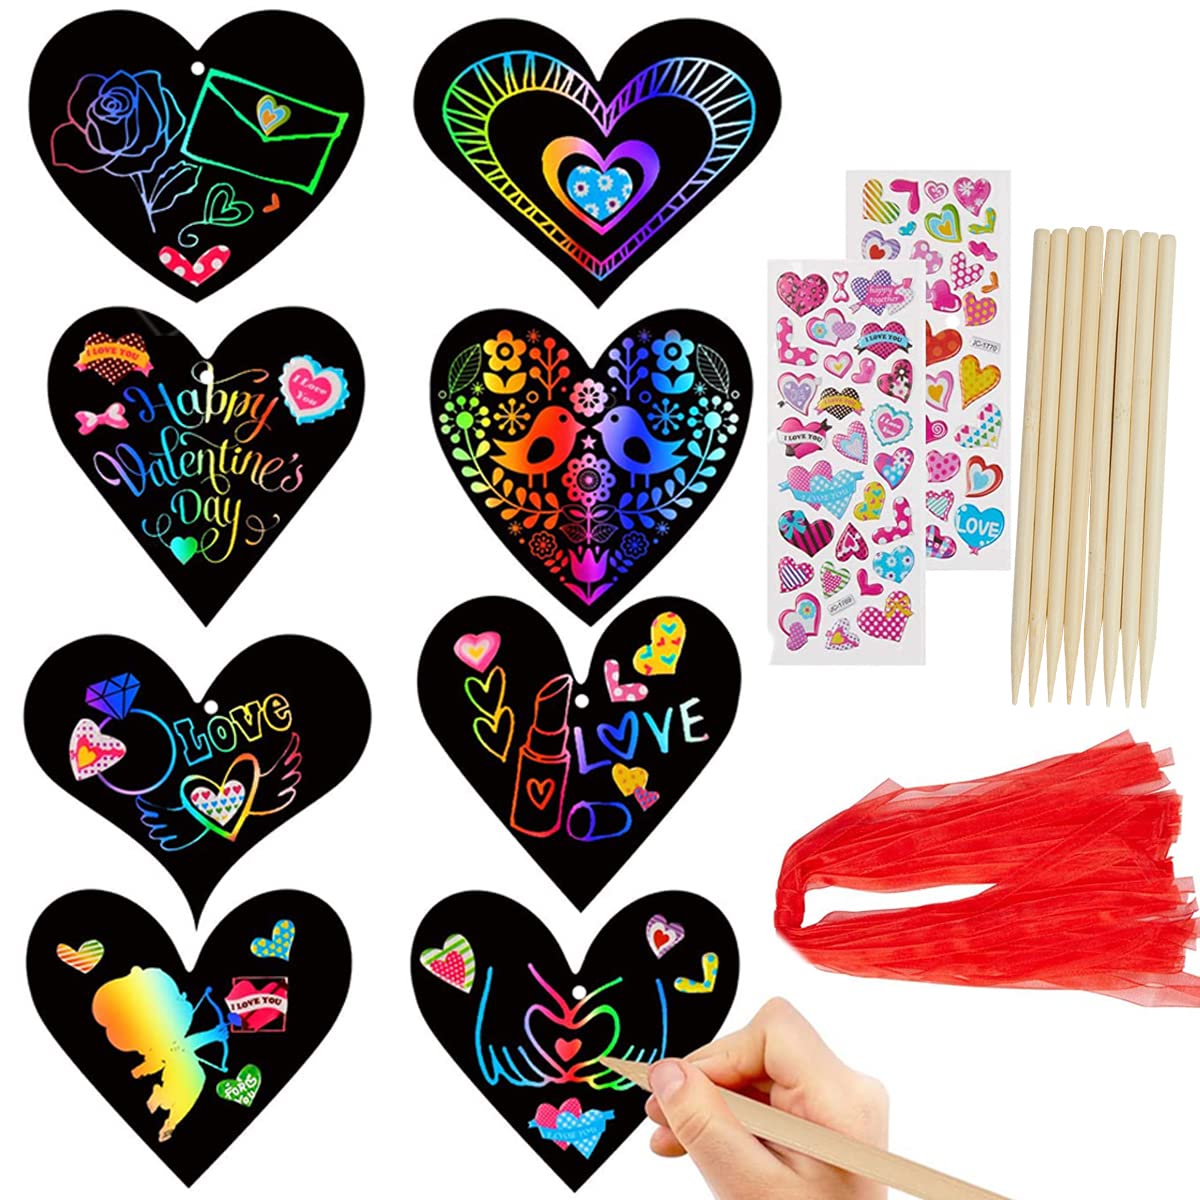 iLuane Valentines Day Craft Kit for Kids 42 Packs Gifts Cards, Magic Color  Rainbow Heart Shape Scratch Craft Art Kit for Class Valentines DIY Art